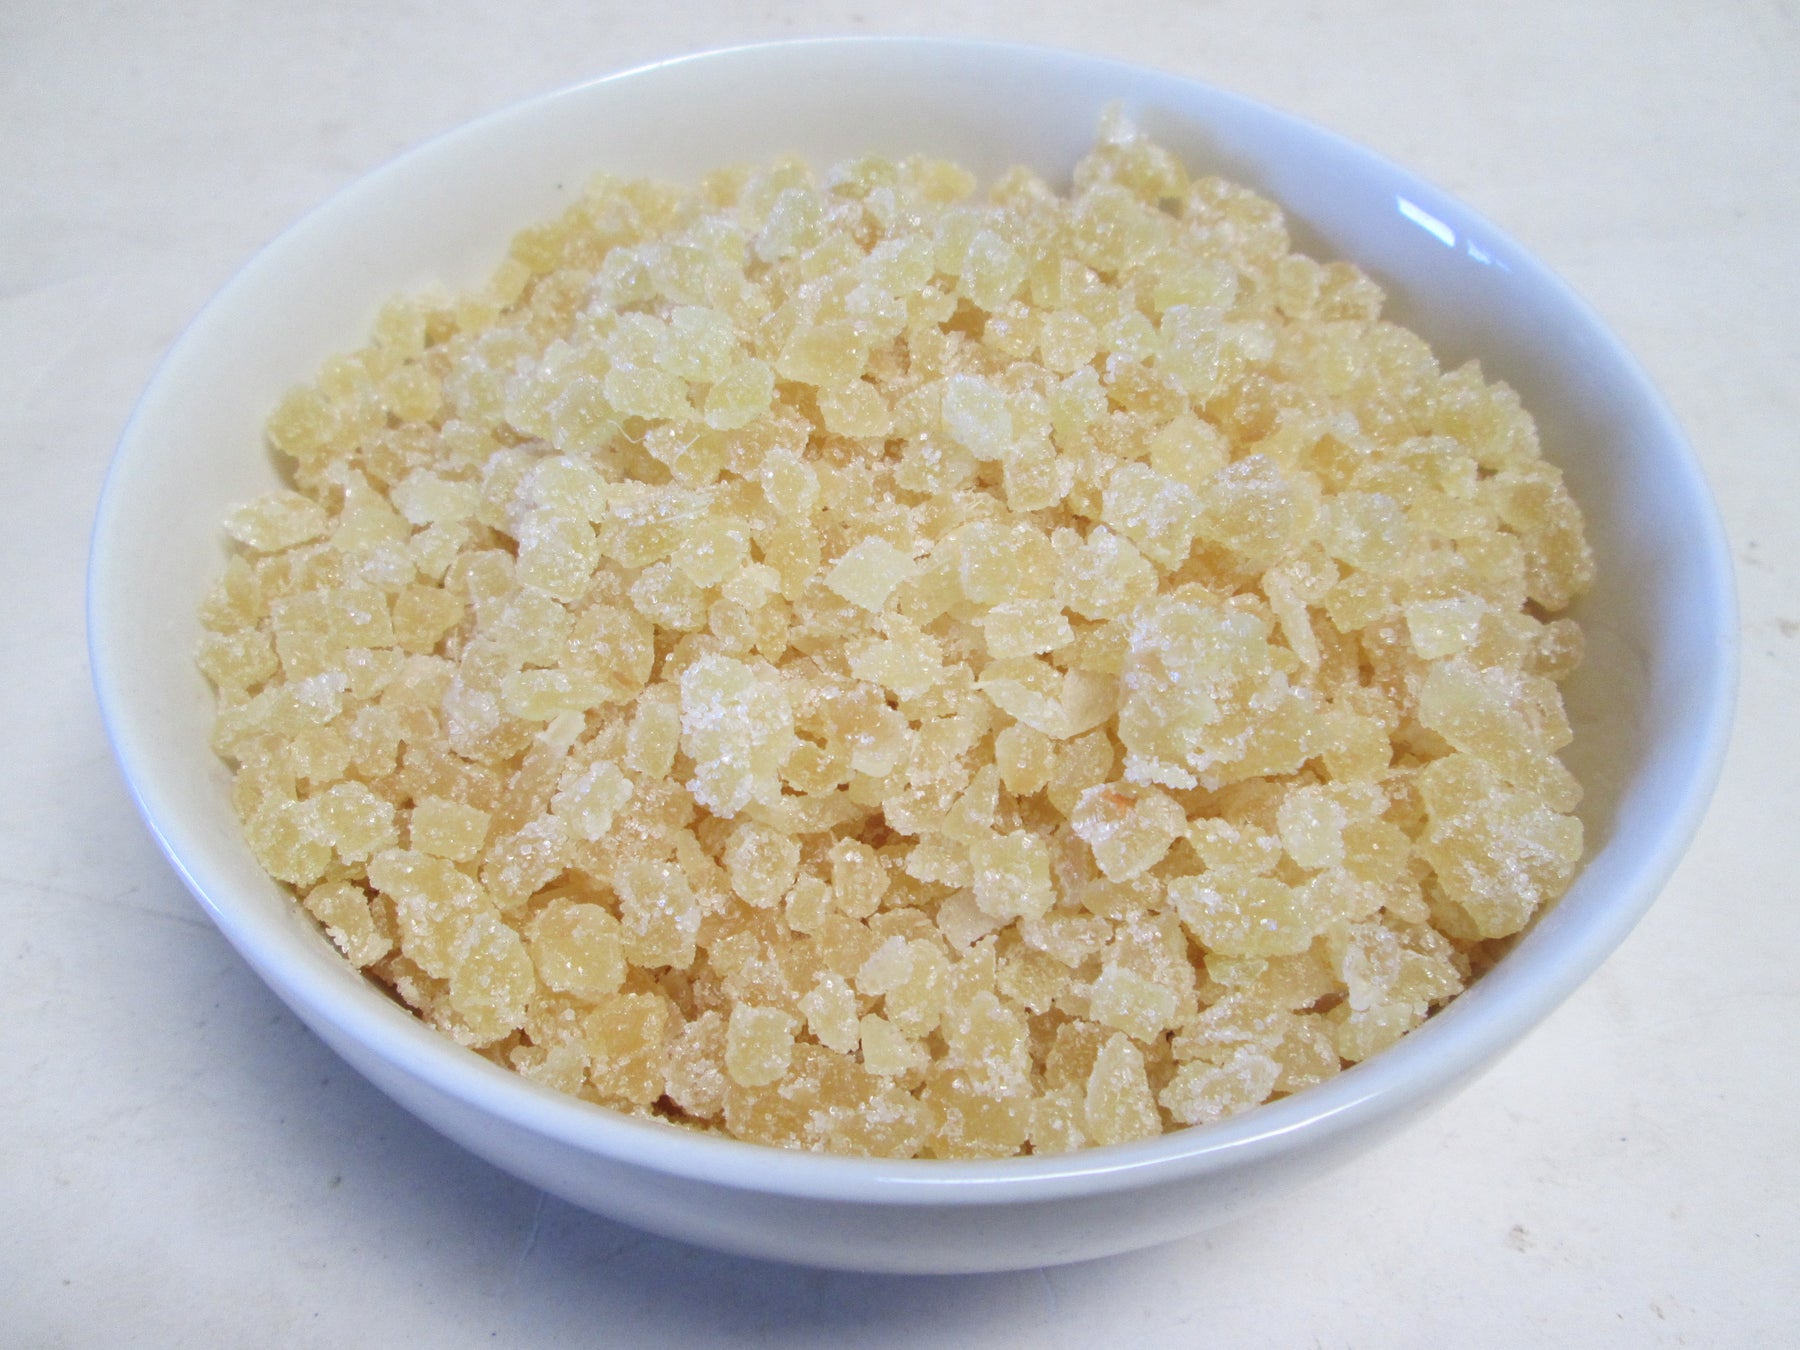 Crystallized Un-sulfured Ginger Dices (Candied), 44 lbs / case